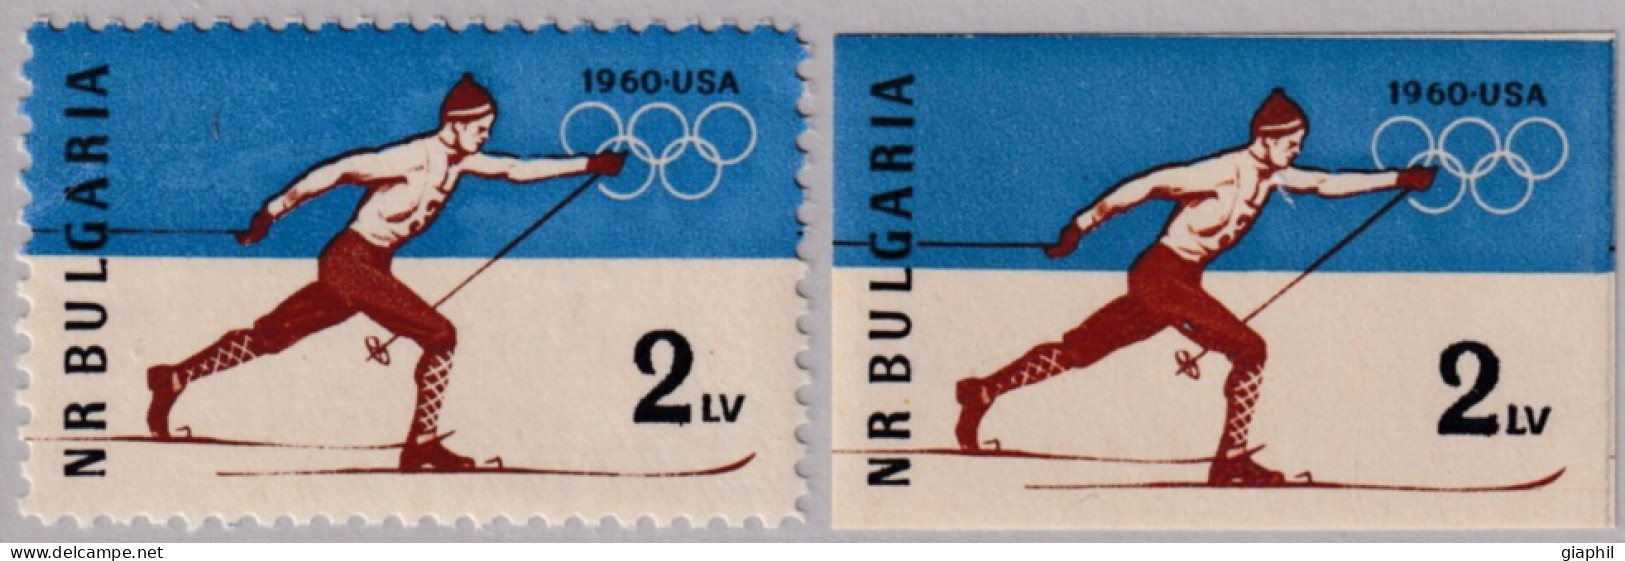 BULGARIA BULGARIE 1960 SQUAW VALLEY OLYMPIC GAMES SET (Mi 1152A-1152B) MNH ** OFFER! - Winter 1960: Squaw Valley